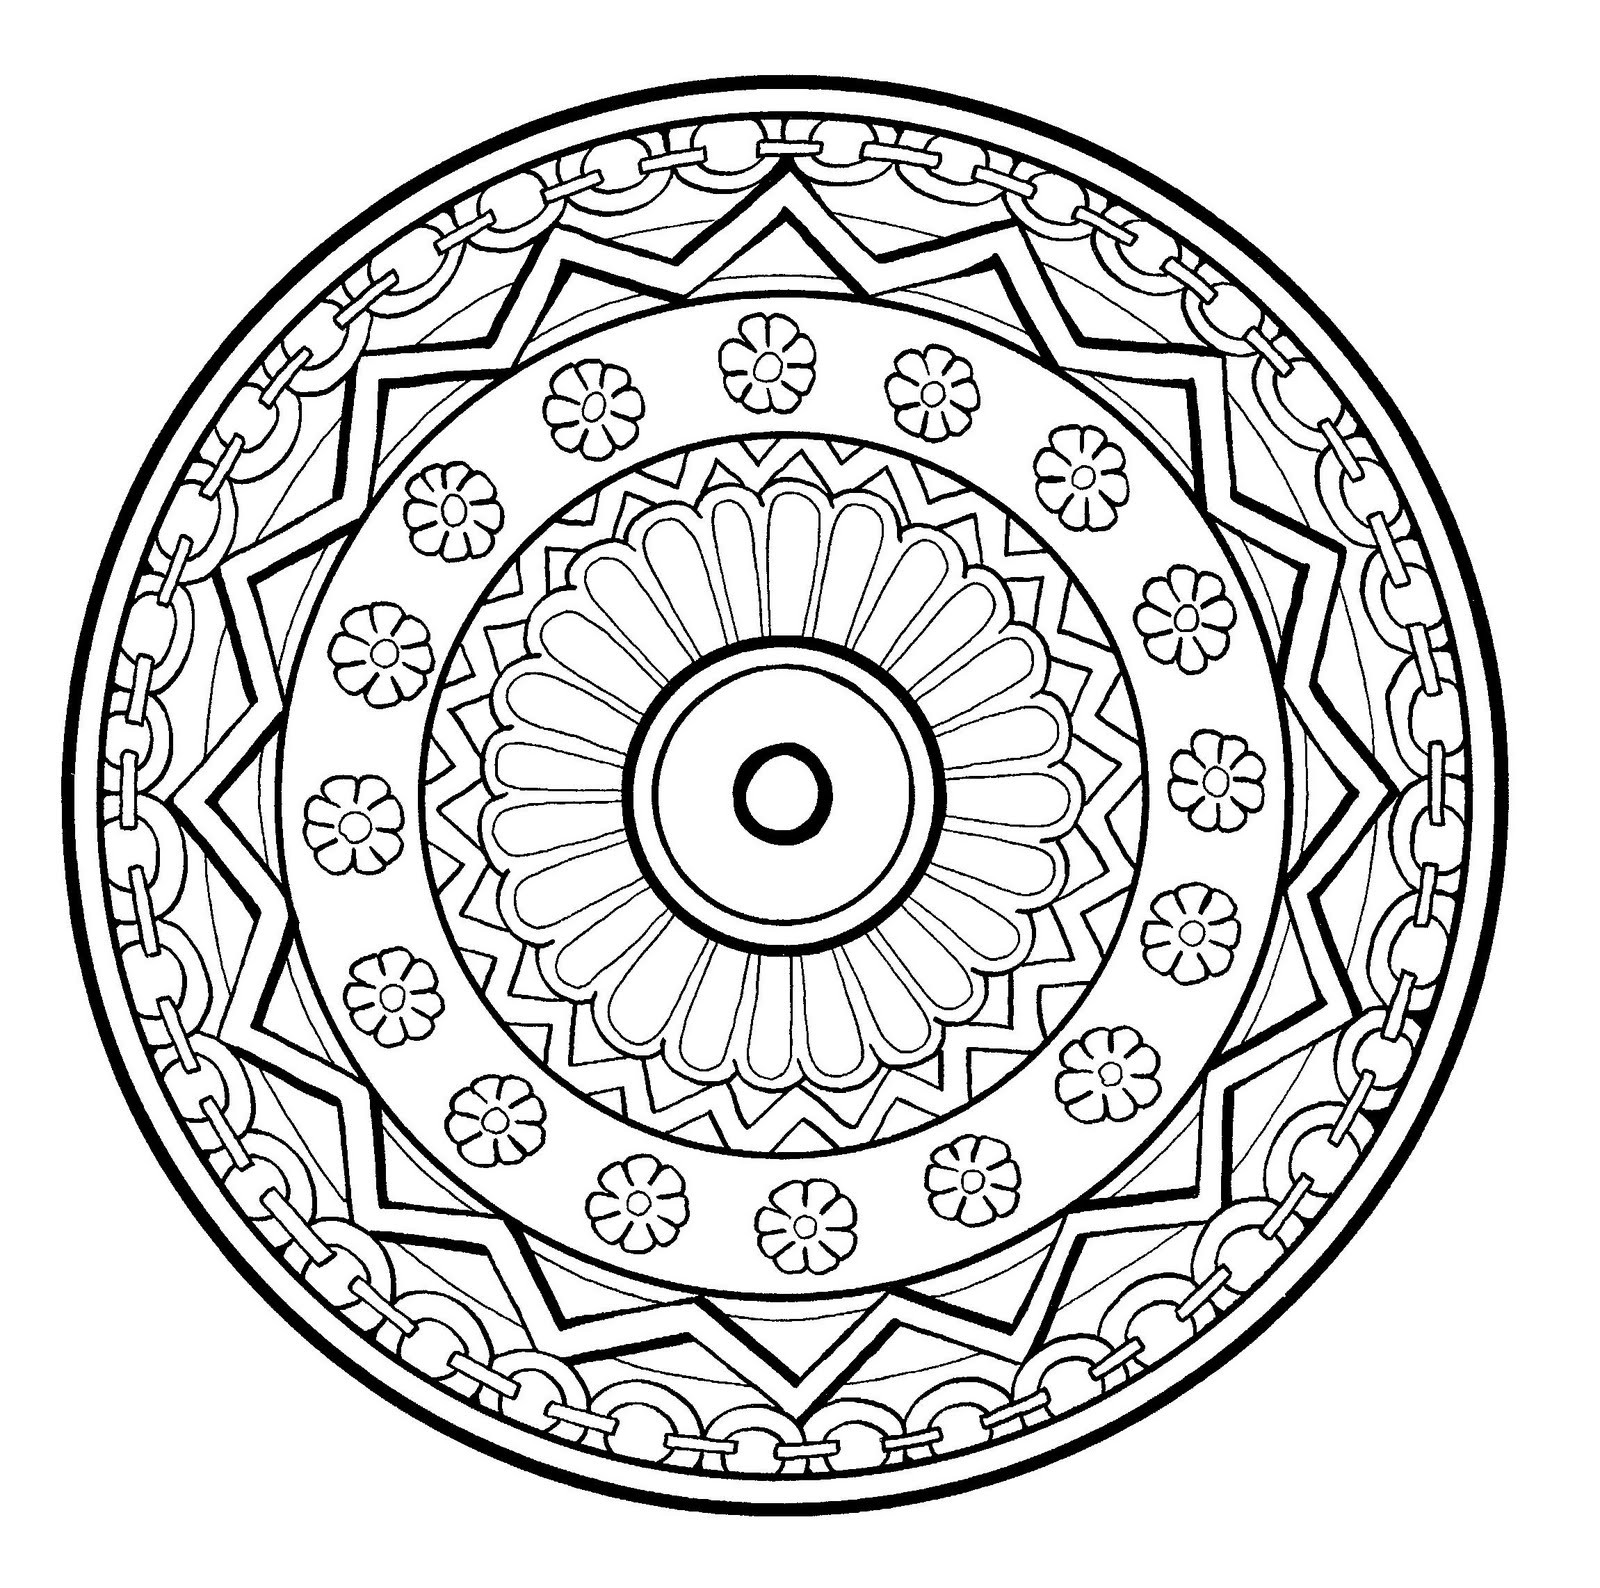 Free Coloring Pages For Adults Mandala
 28 Free Printable Mandala Coloring Pages for Adults